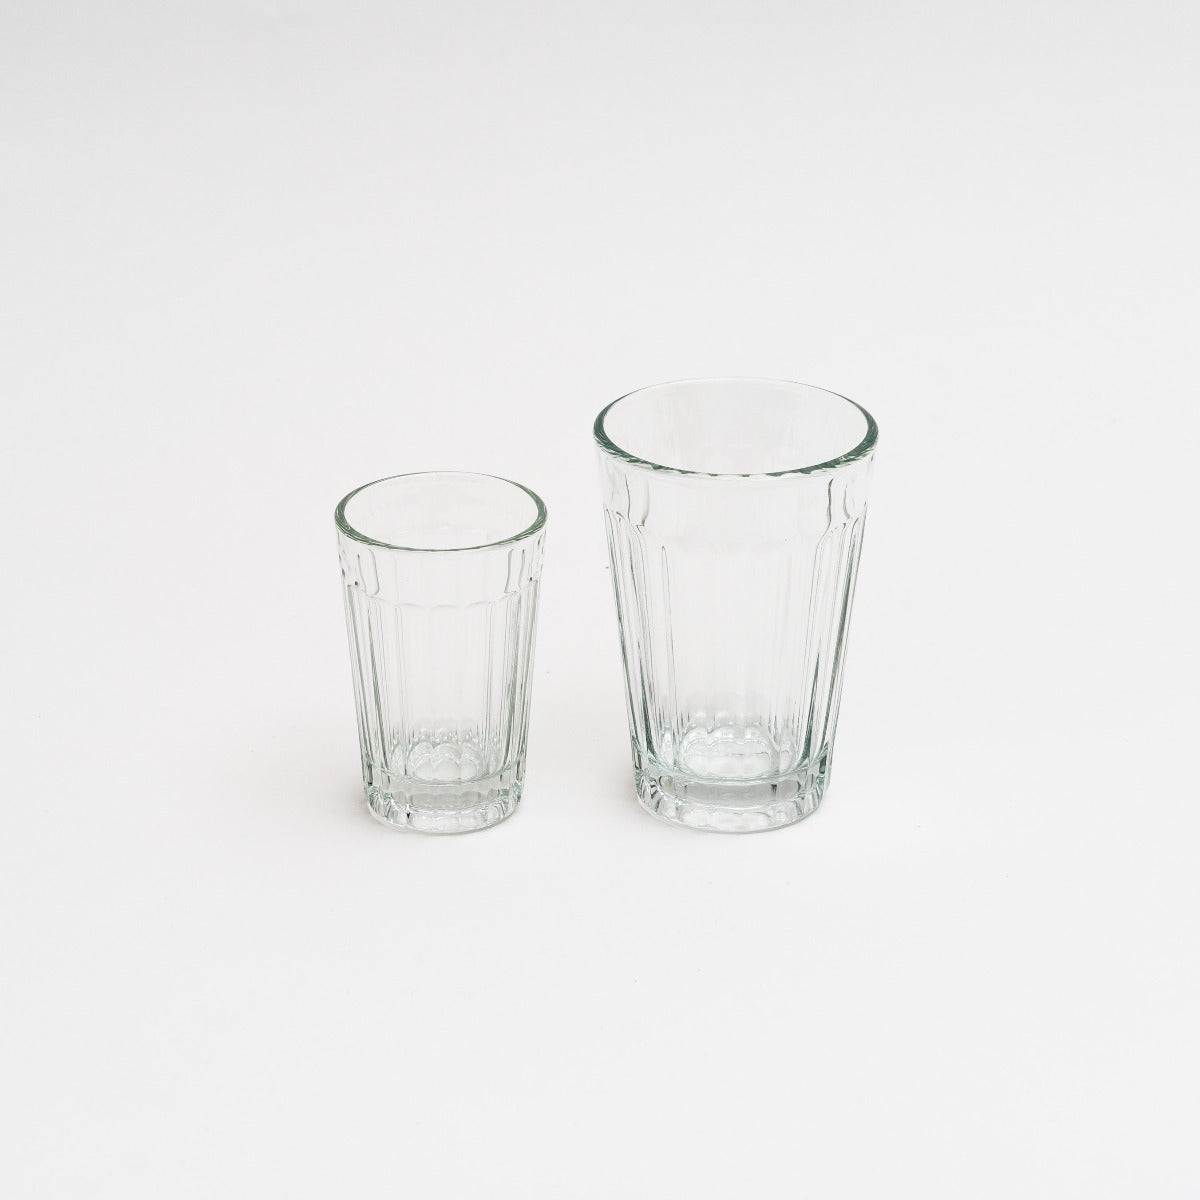 Handblown everday glass tumblers made in portugal 